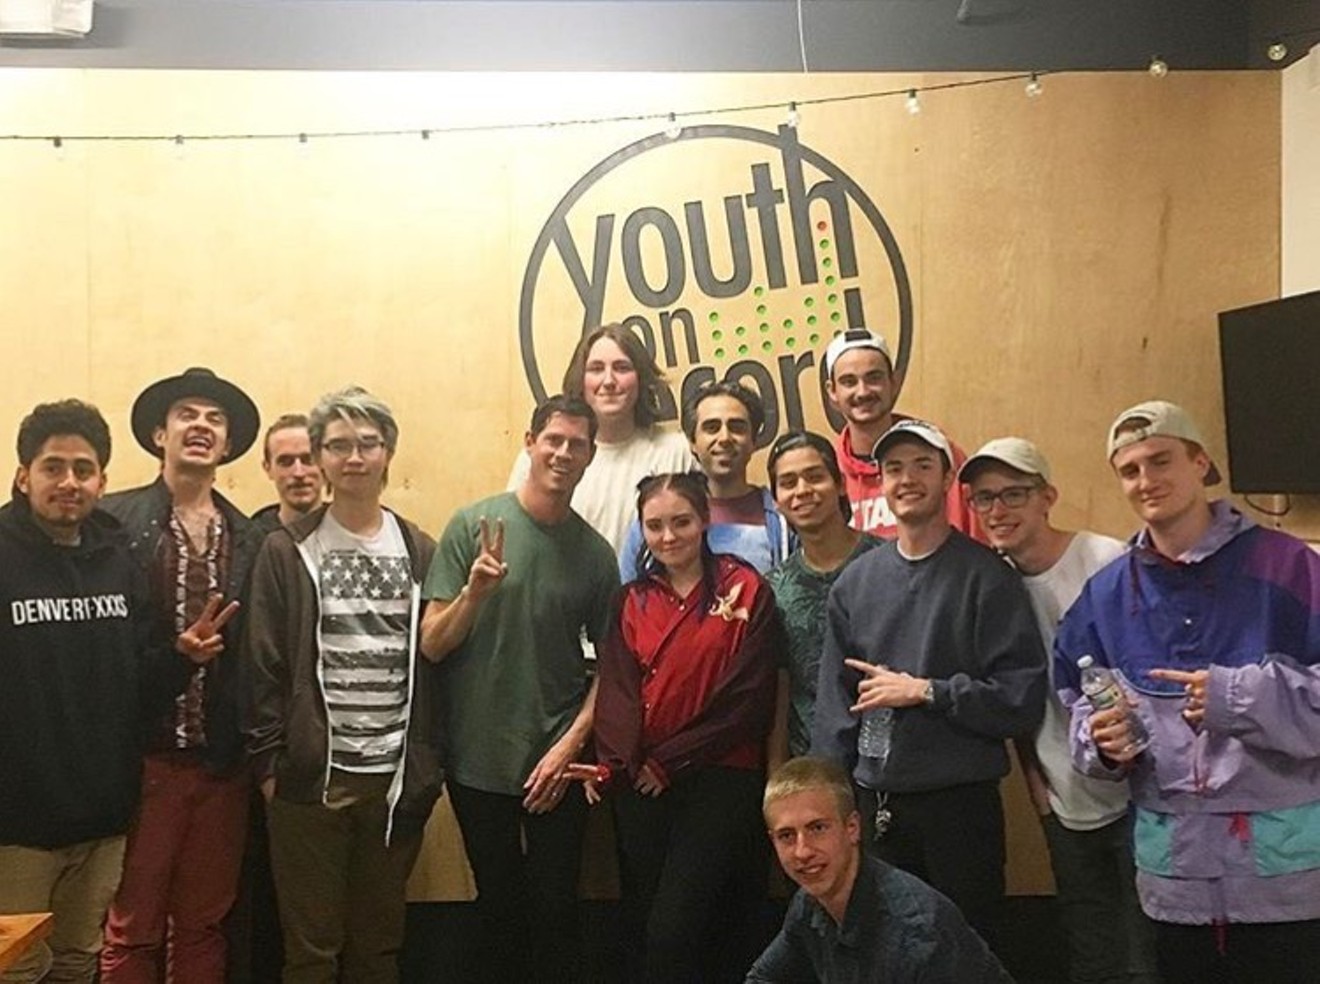 Dominic Lalli (center, in green) enjoys working with the teens at Youth on Record, noting their passion and curiosity about music.